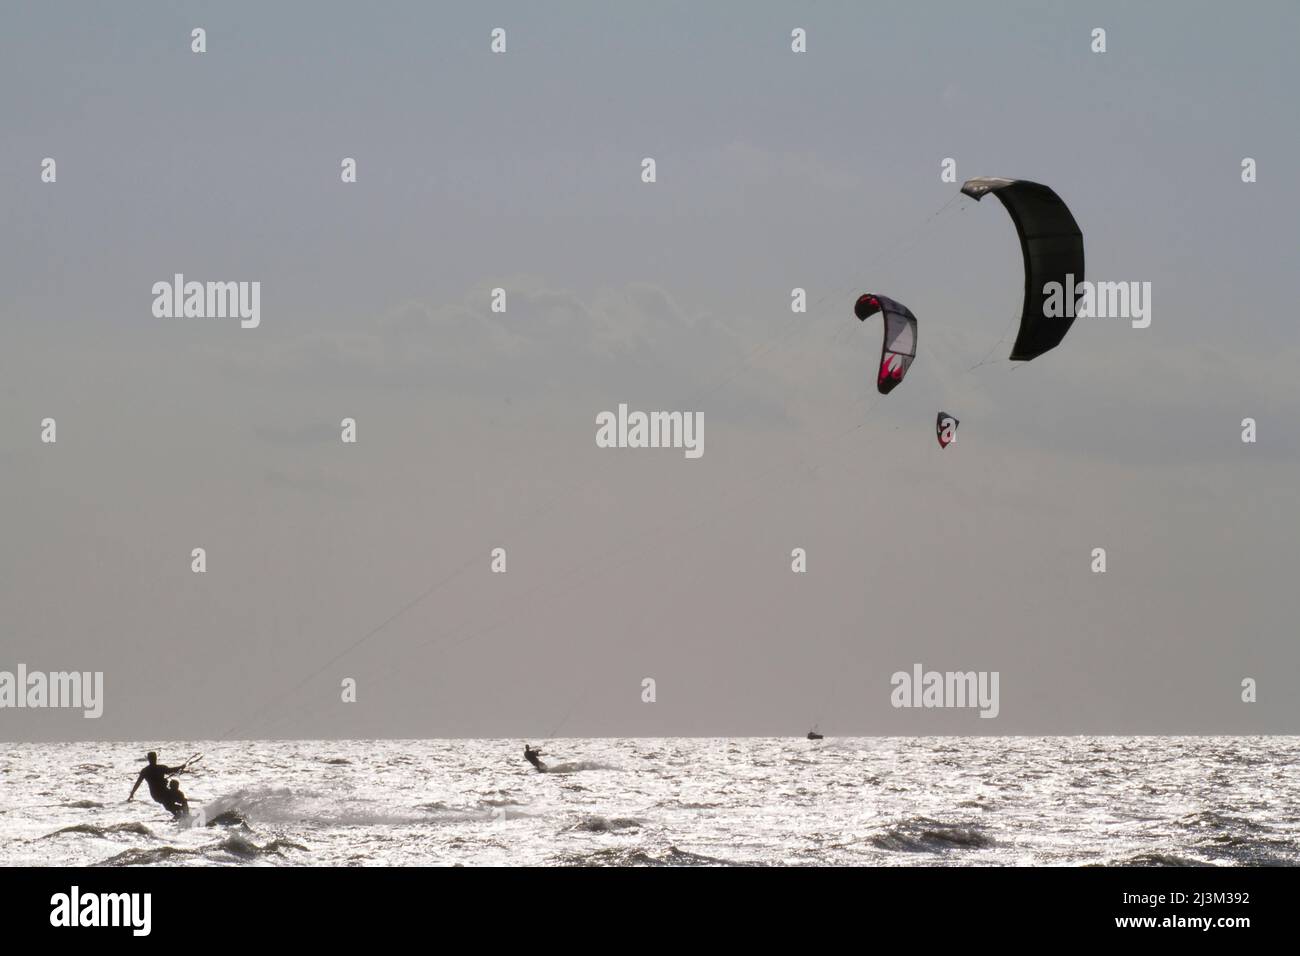 A father and son kite board together on the Pamlico Sound.; Nags Head, North Carolina. Stock Photo